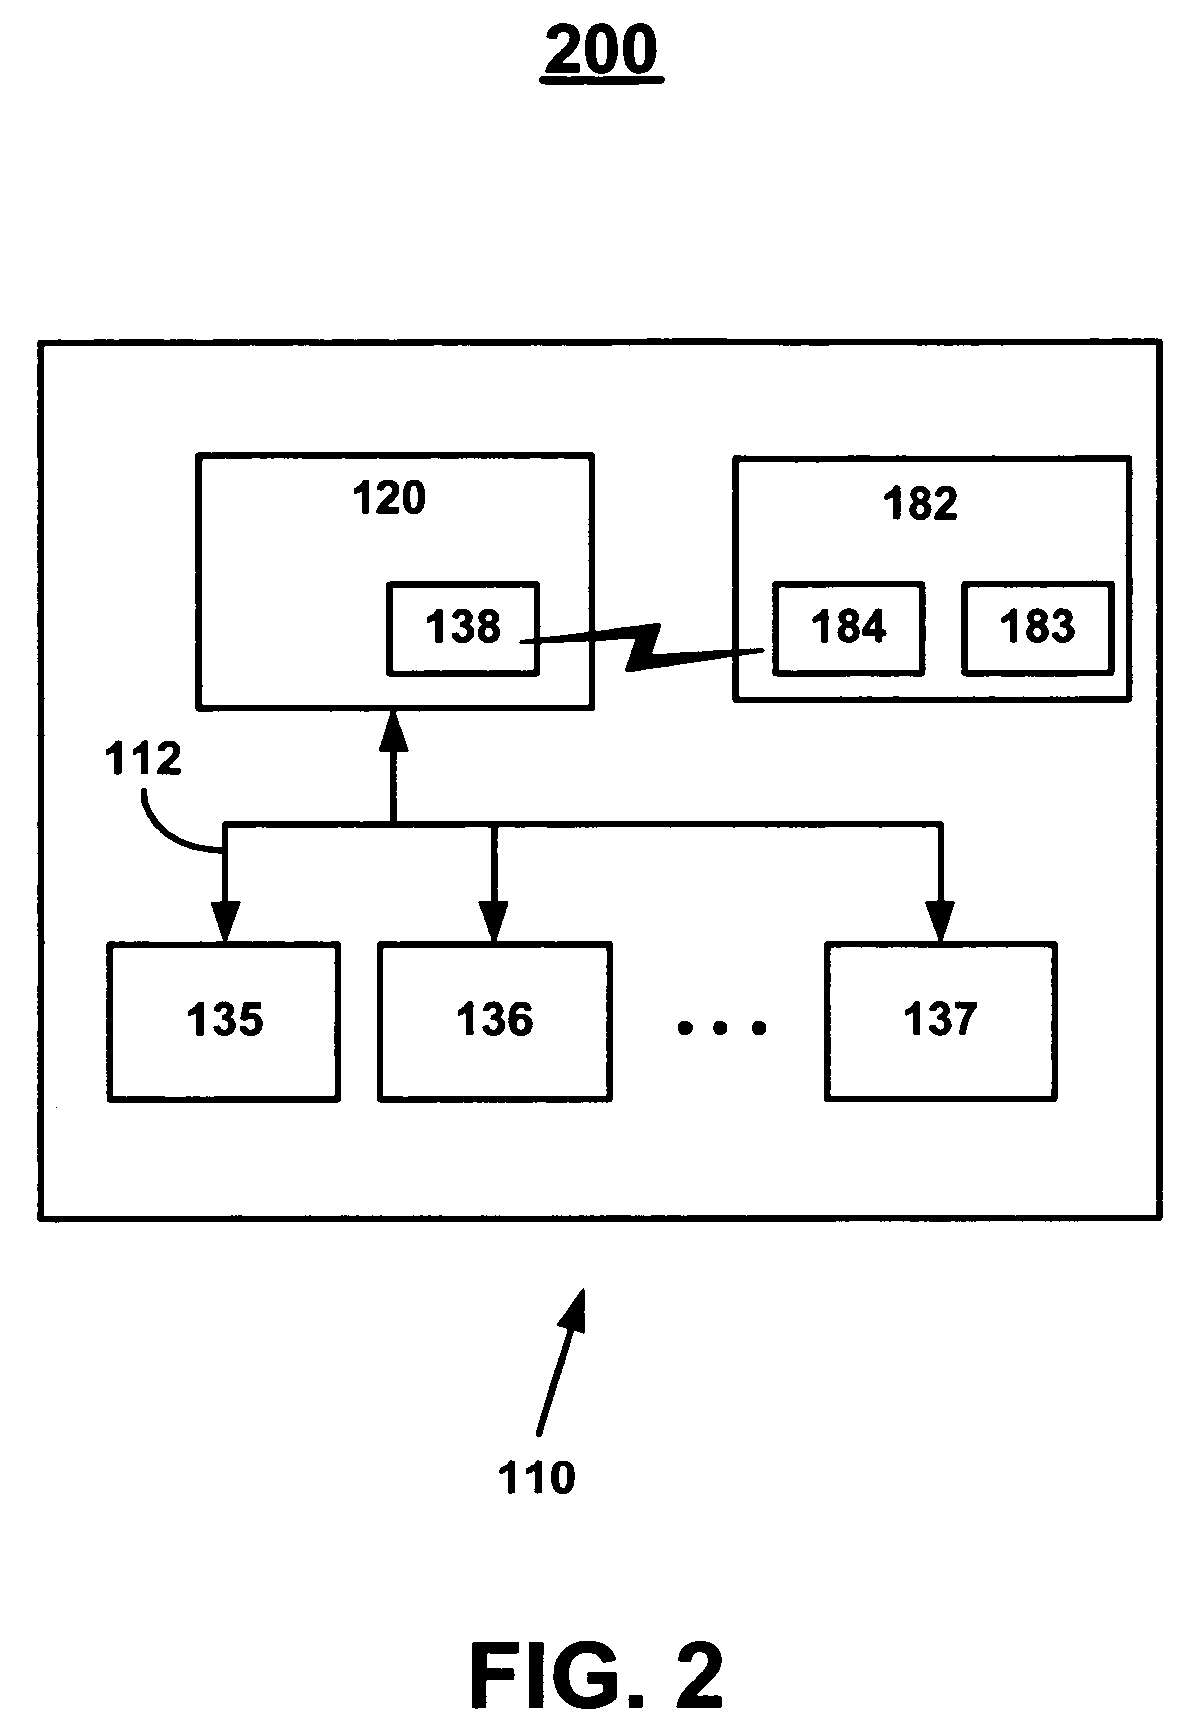 System and method for data storage and diagnostics in a portable communications device interfaced with a telematics unit